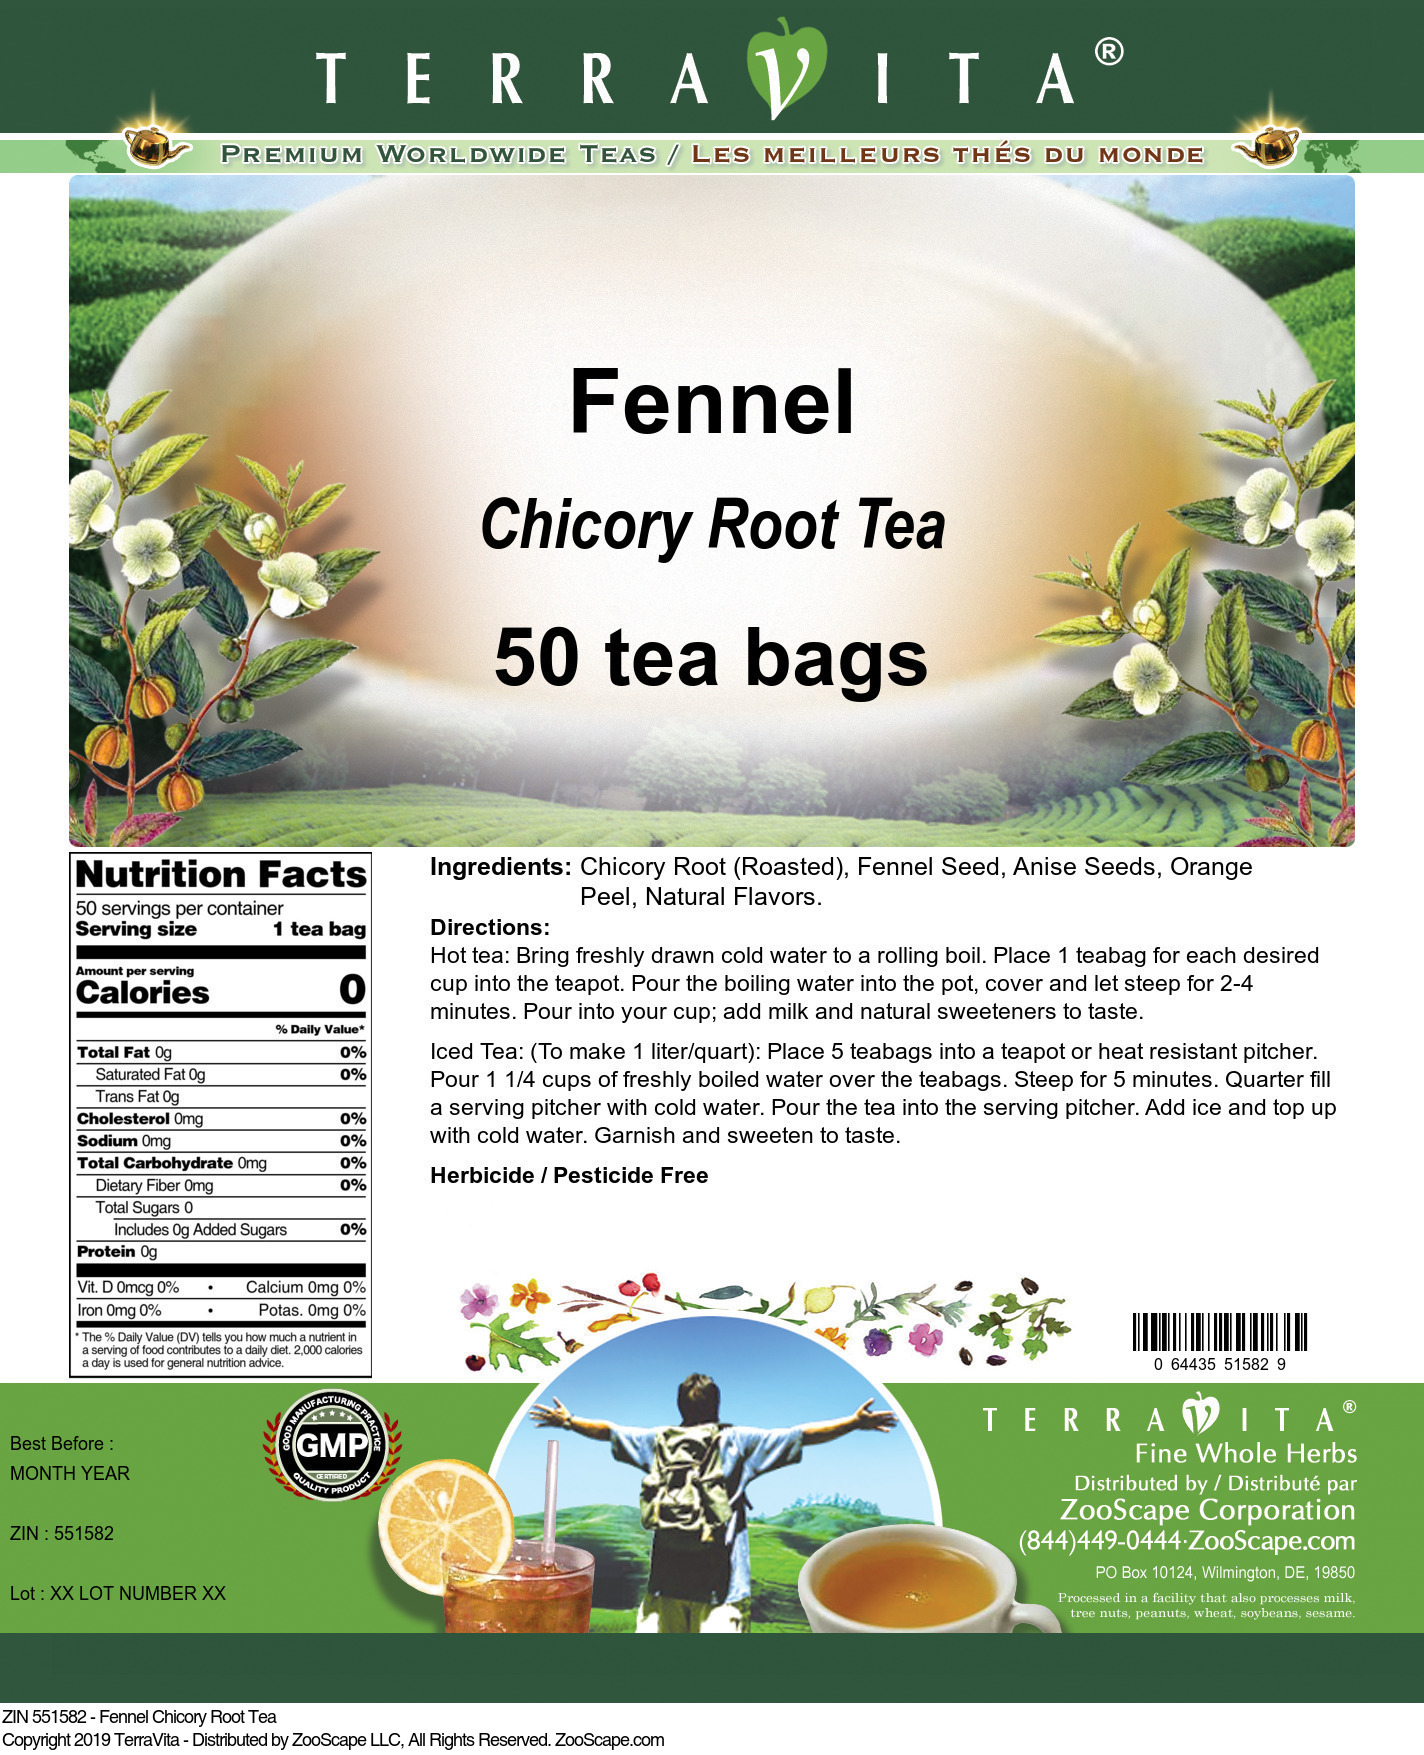 Fennel Chicory Root Tea - Label